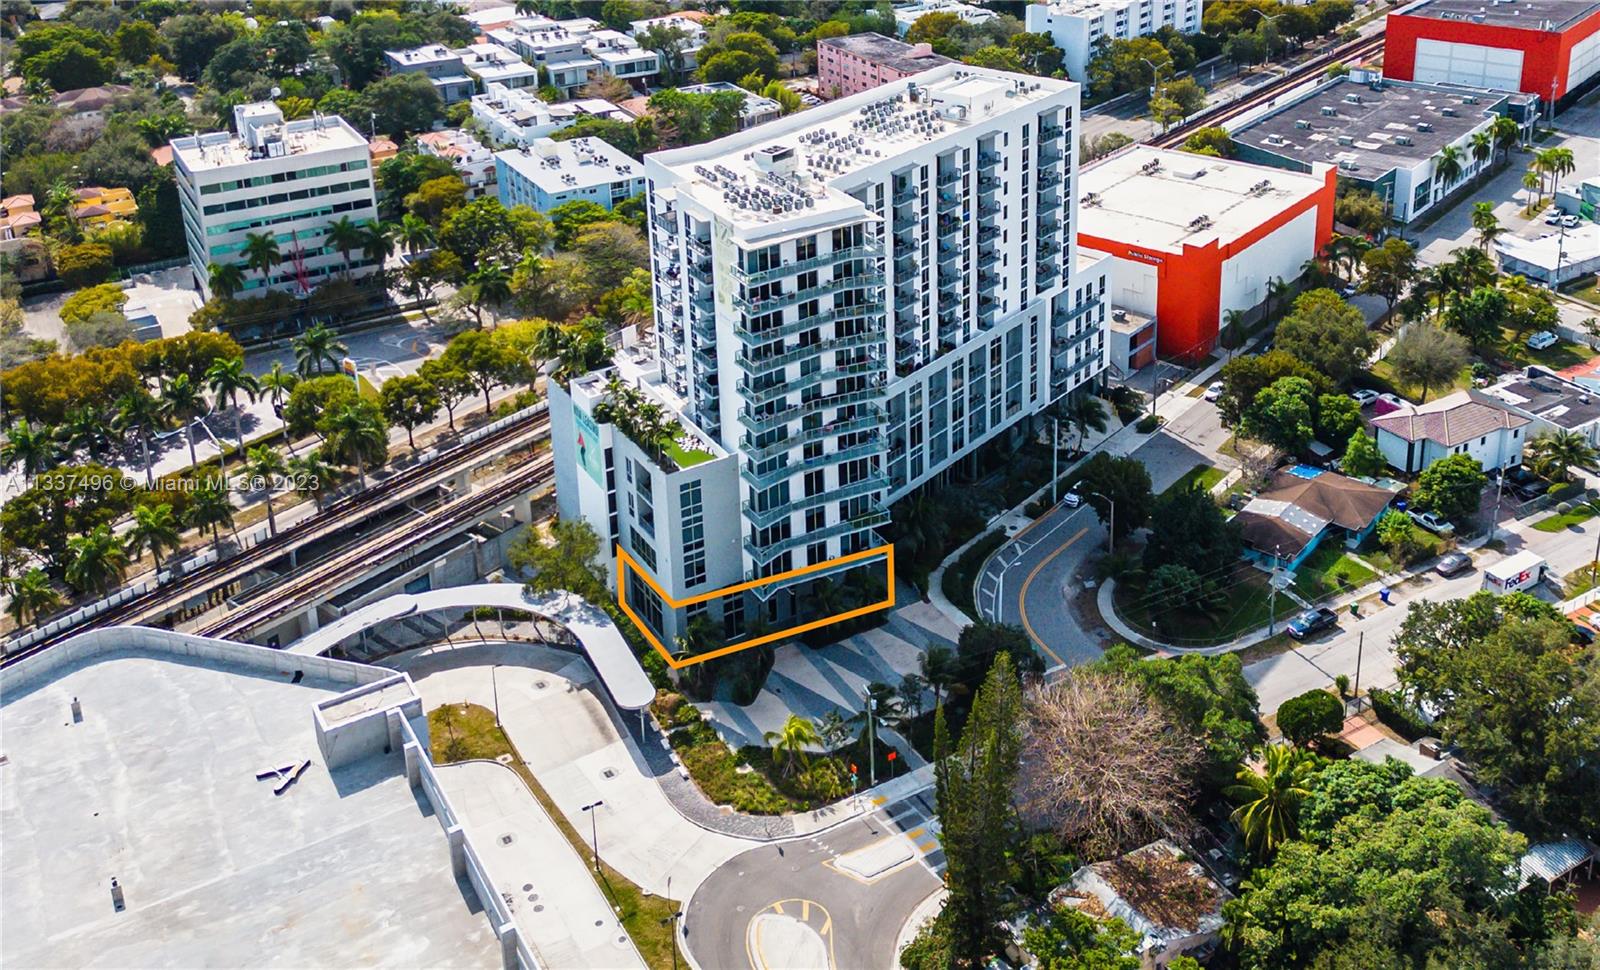 Opportunity to lease the ground floor commercial space at the 130 apartment building, Zoi House. The retail/office space conveniently located right next to the Coconut Grove Metrorail station and minutes away from downtown Coconut Grove, Brickell and Coral Gables. The space is prime for a variety of uses including a restaurant, gym, cafe, specialty market, event space, office and other creative uses.